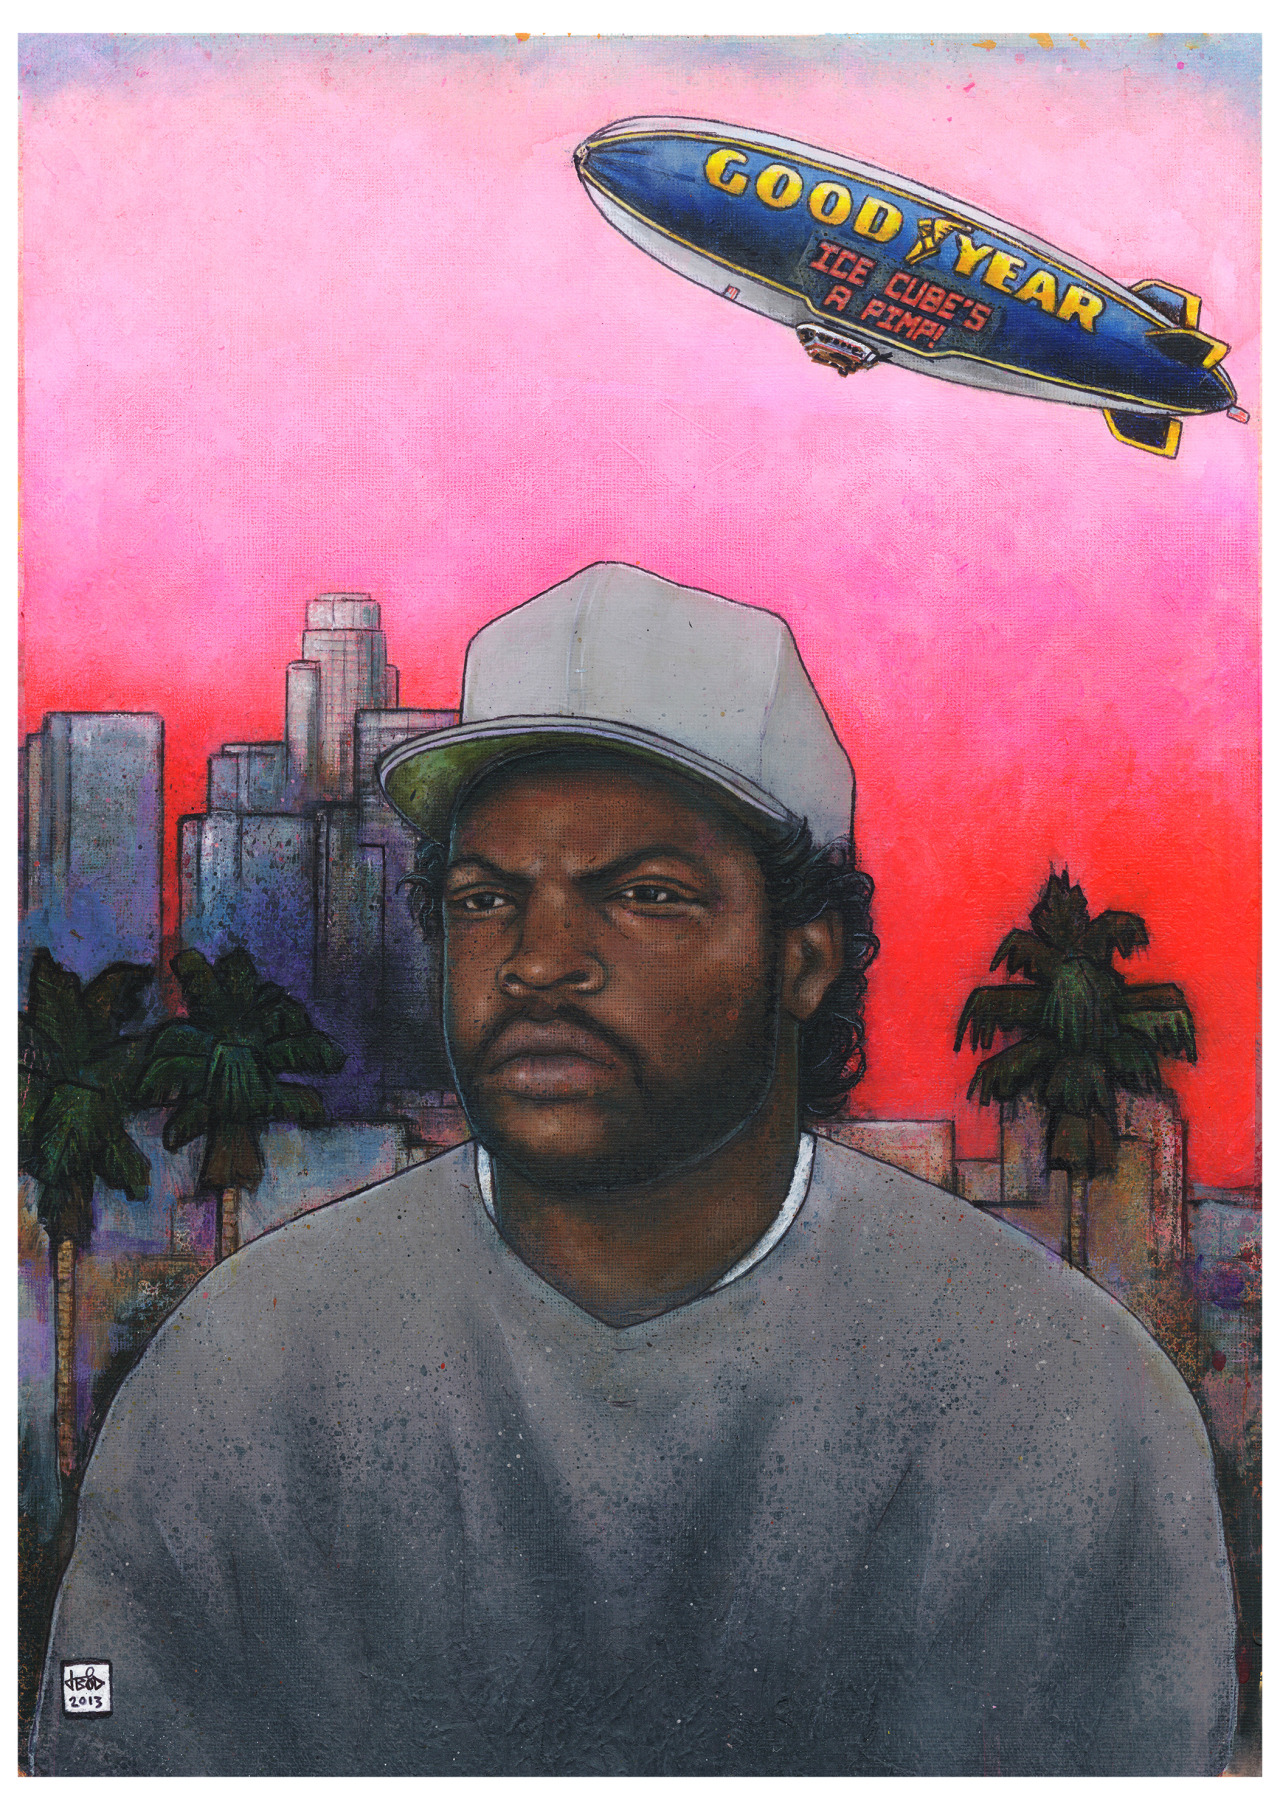 “Even saw the lights of the Goodyear blimp, and it read ‘ICE CUBE’S A PIMP’” Jef D, 2013 Acrylic on paper, 12" x 16" (SOLD) Poster prints available here Twitter: @Jef2D